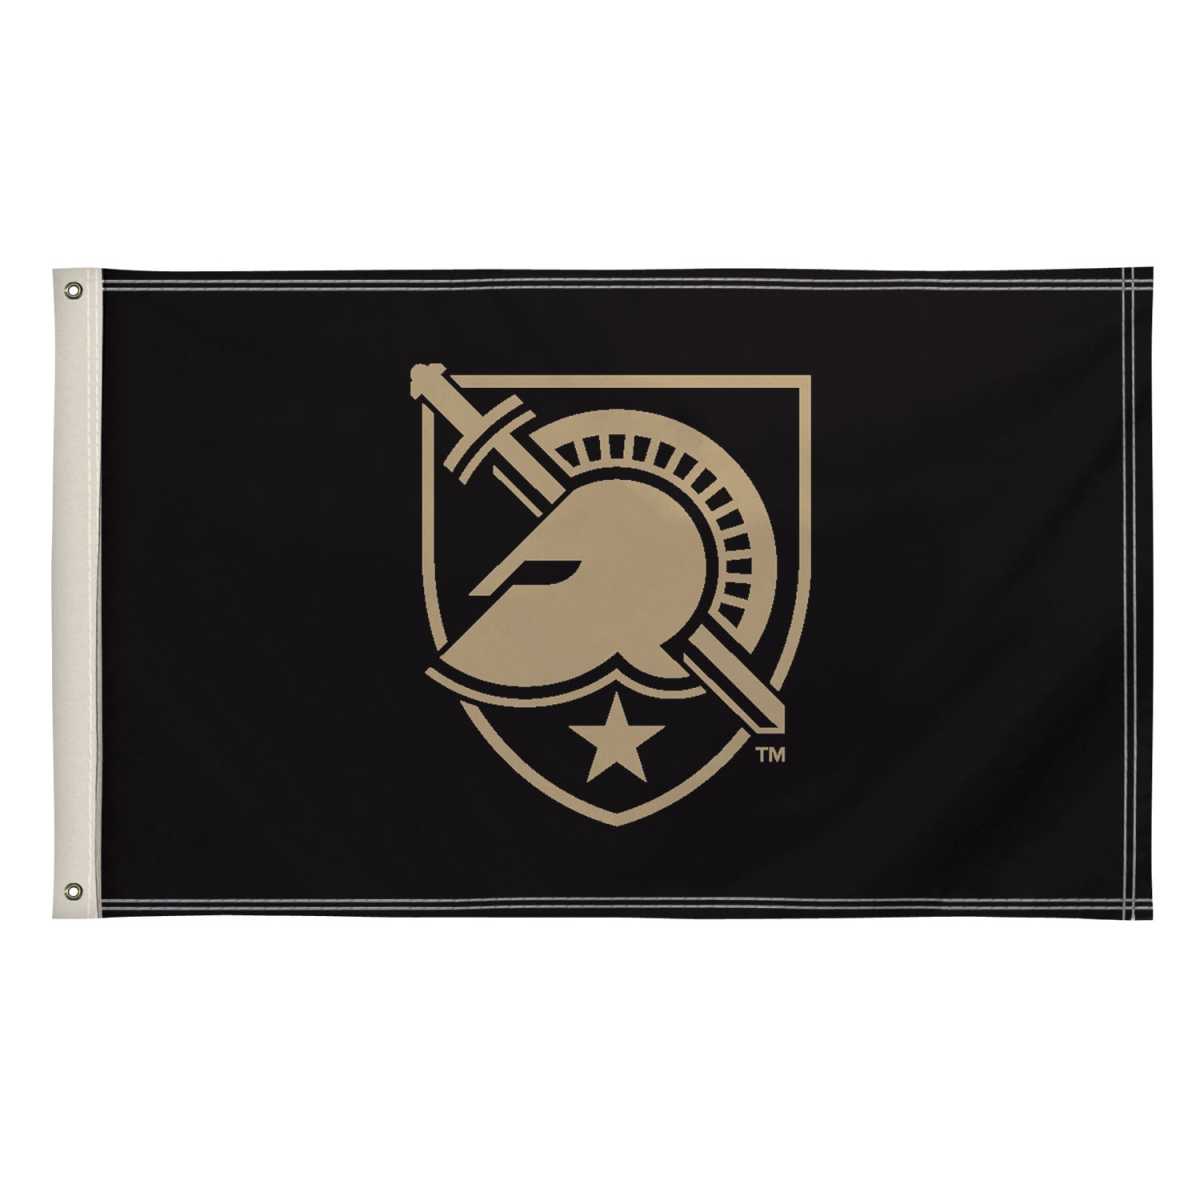 Picture of Showdown Displays 810003ARMY-004 3 x 5 ft. Army Black Knights NCAA Flag - No.004